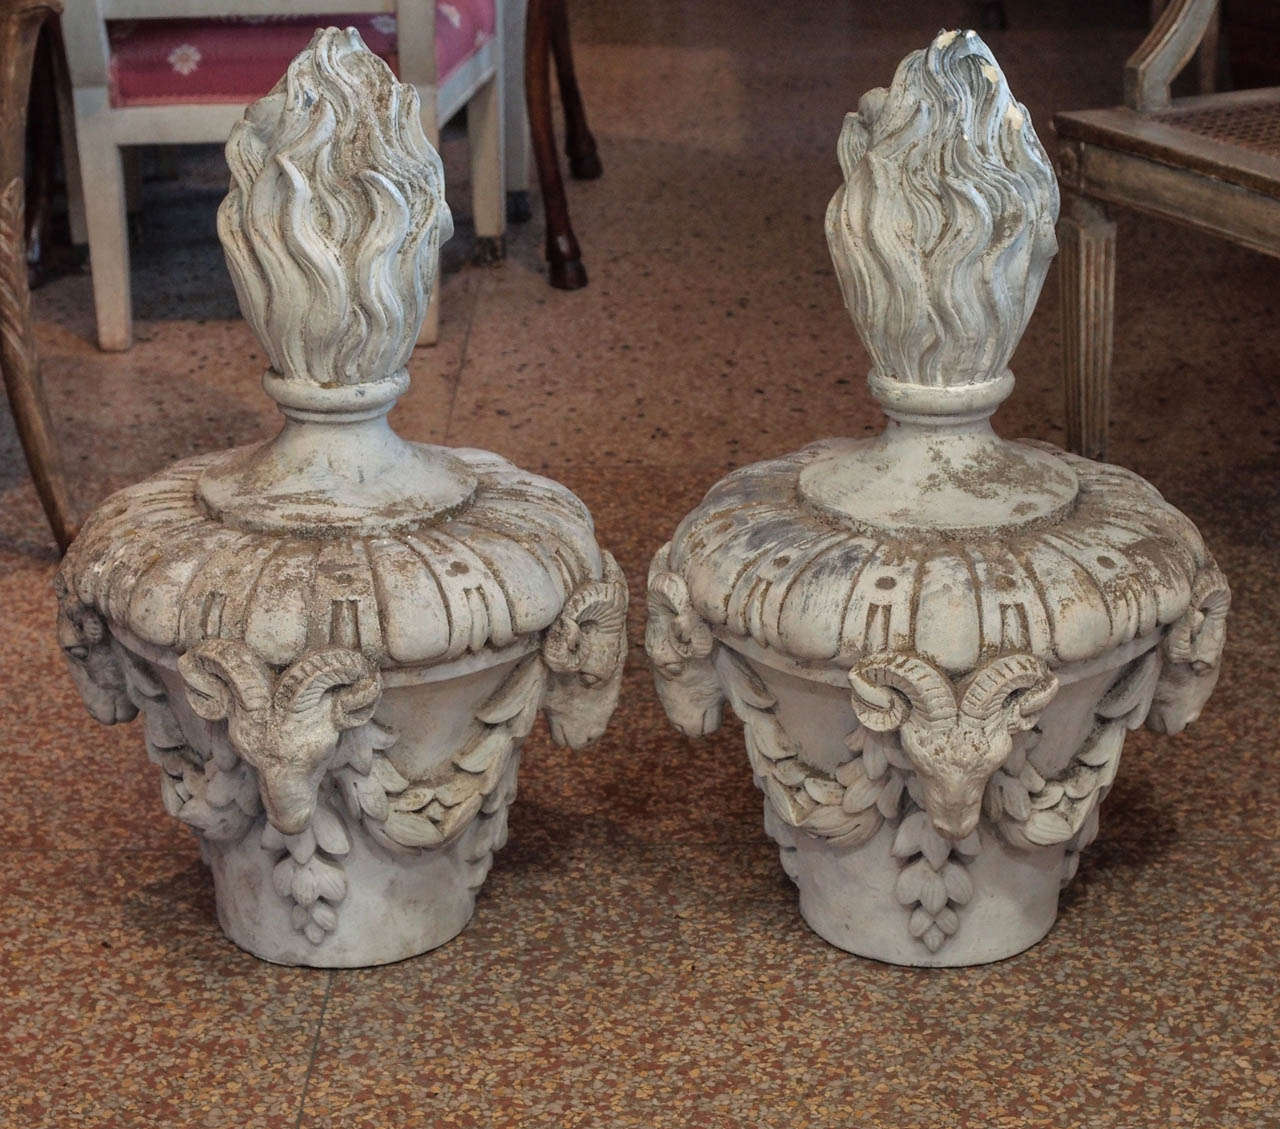 Pair of French gray patinated terra cotta finials having 4 ram's heads, leafy garlands and topped by a large flame.